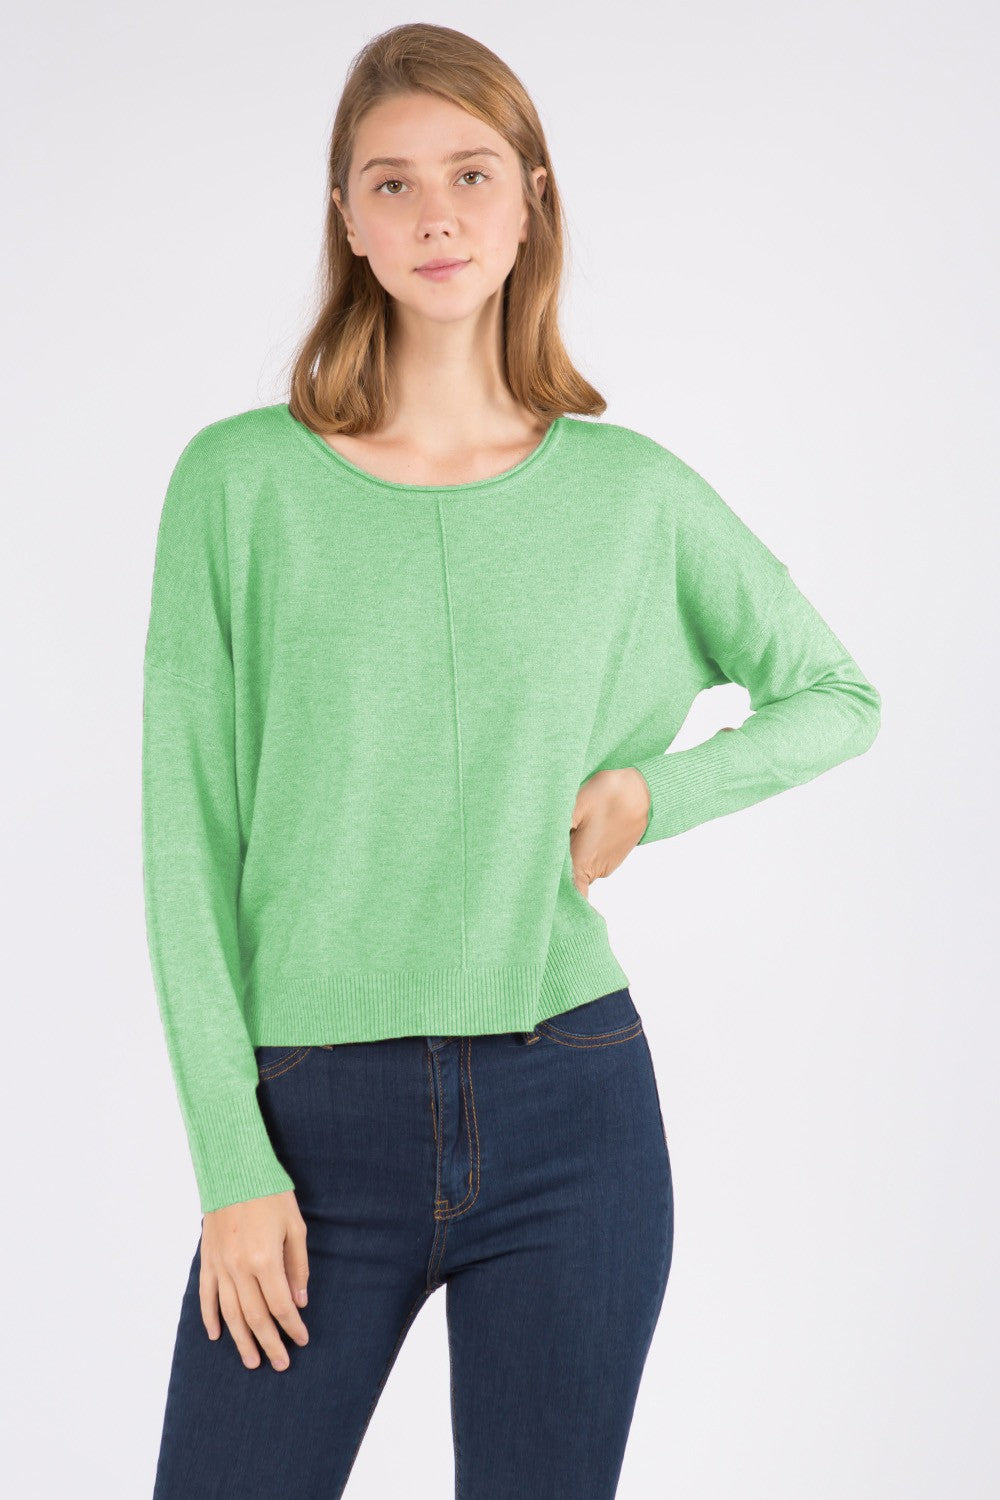 Heather Electric Green Sweater, Sweater by Dreamers | LIT Boutique